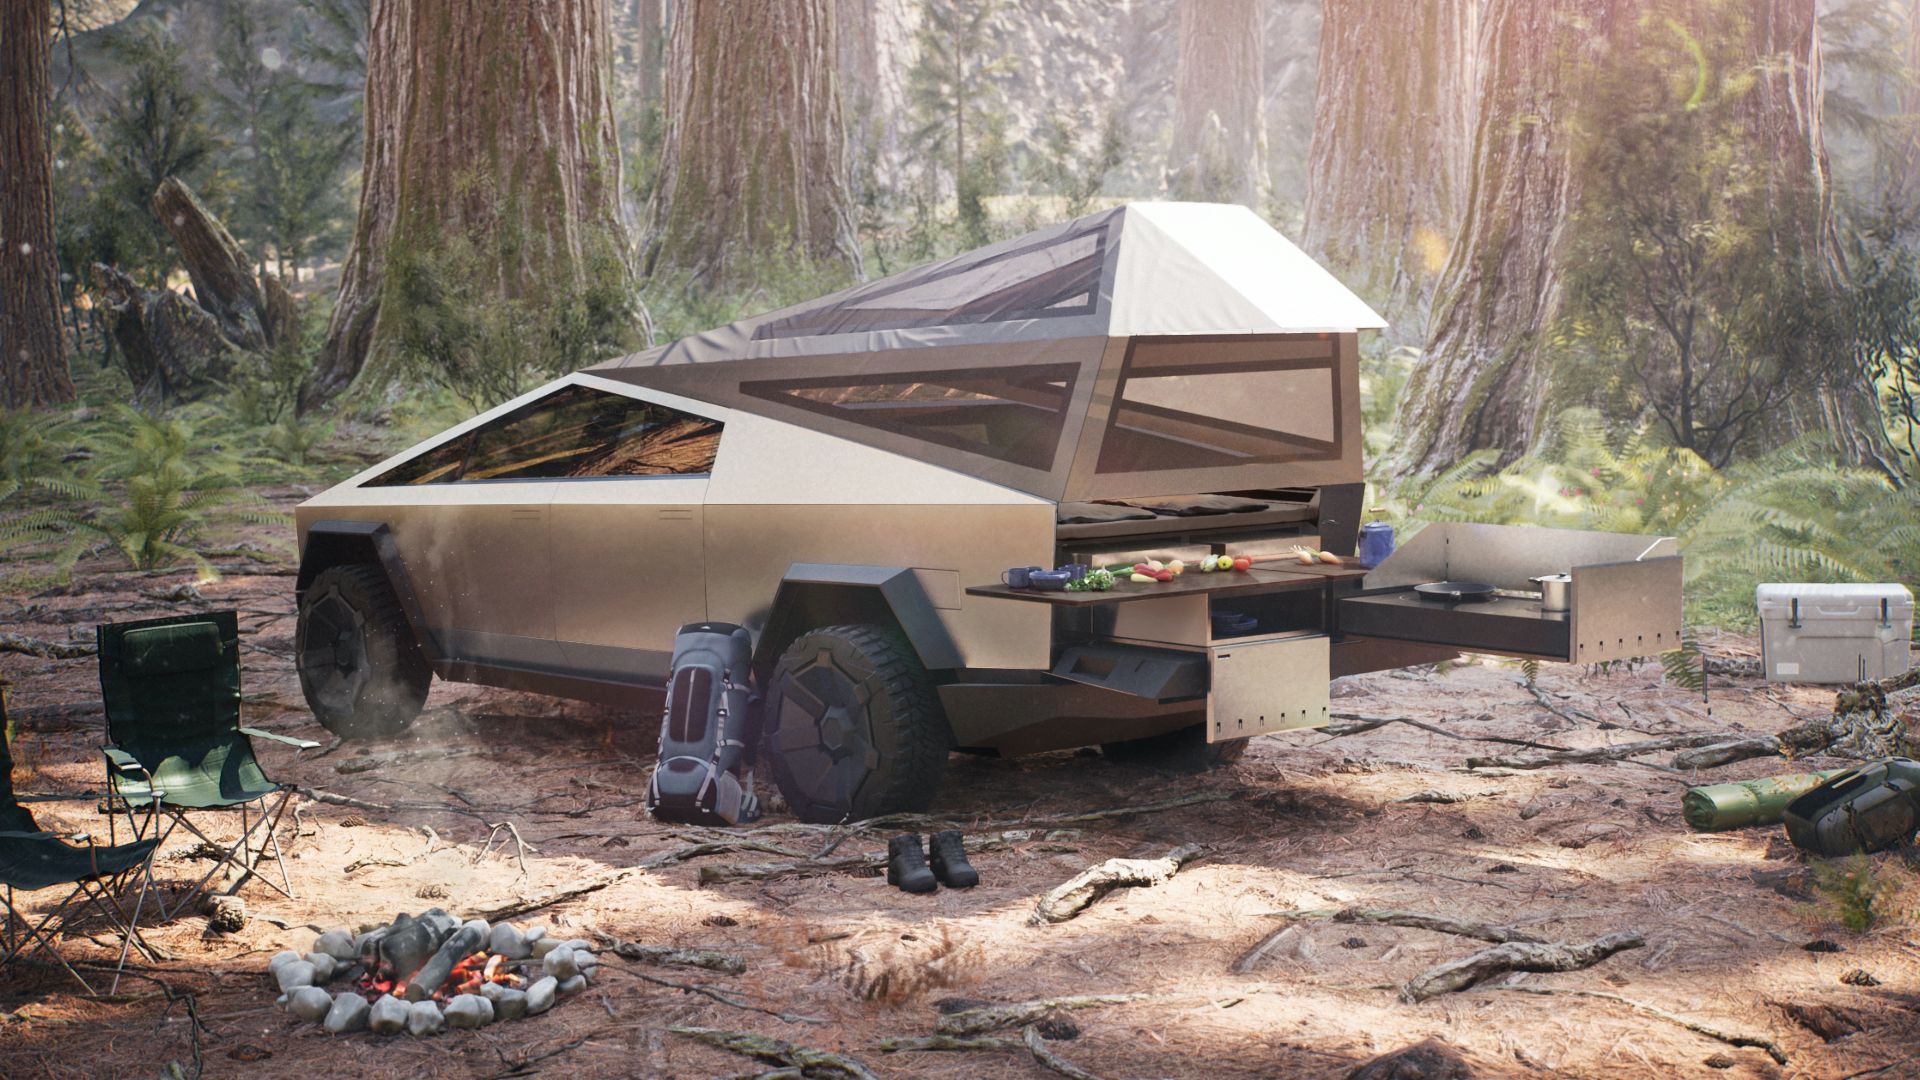 Tesla's camping attachment for the Cybertruck.